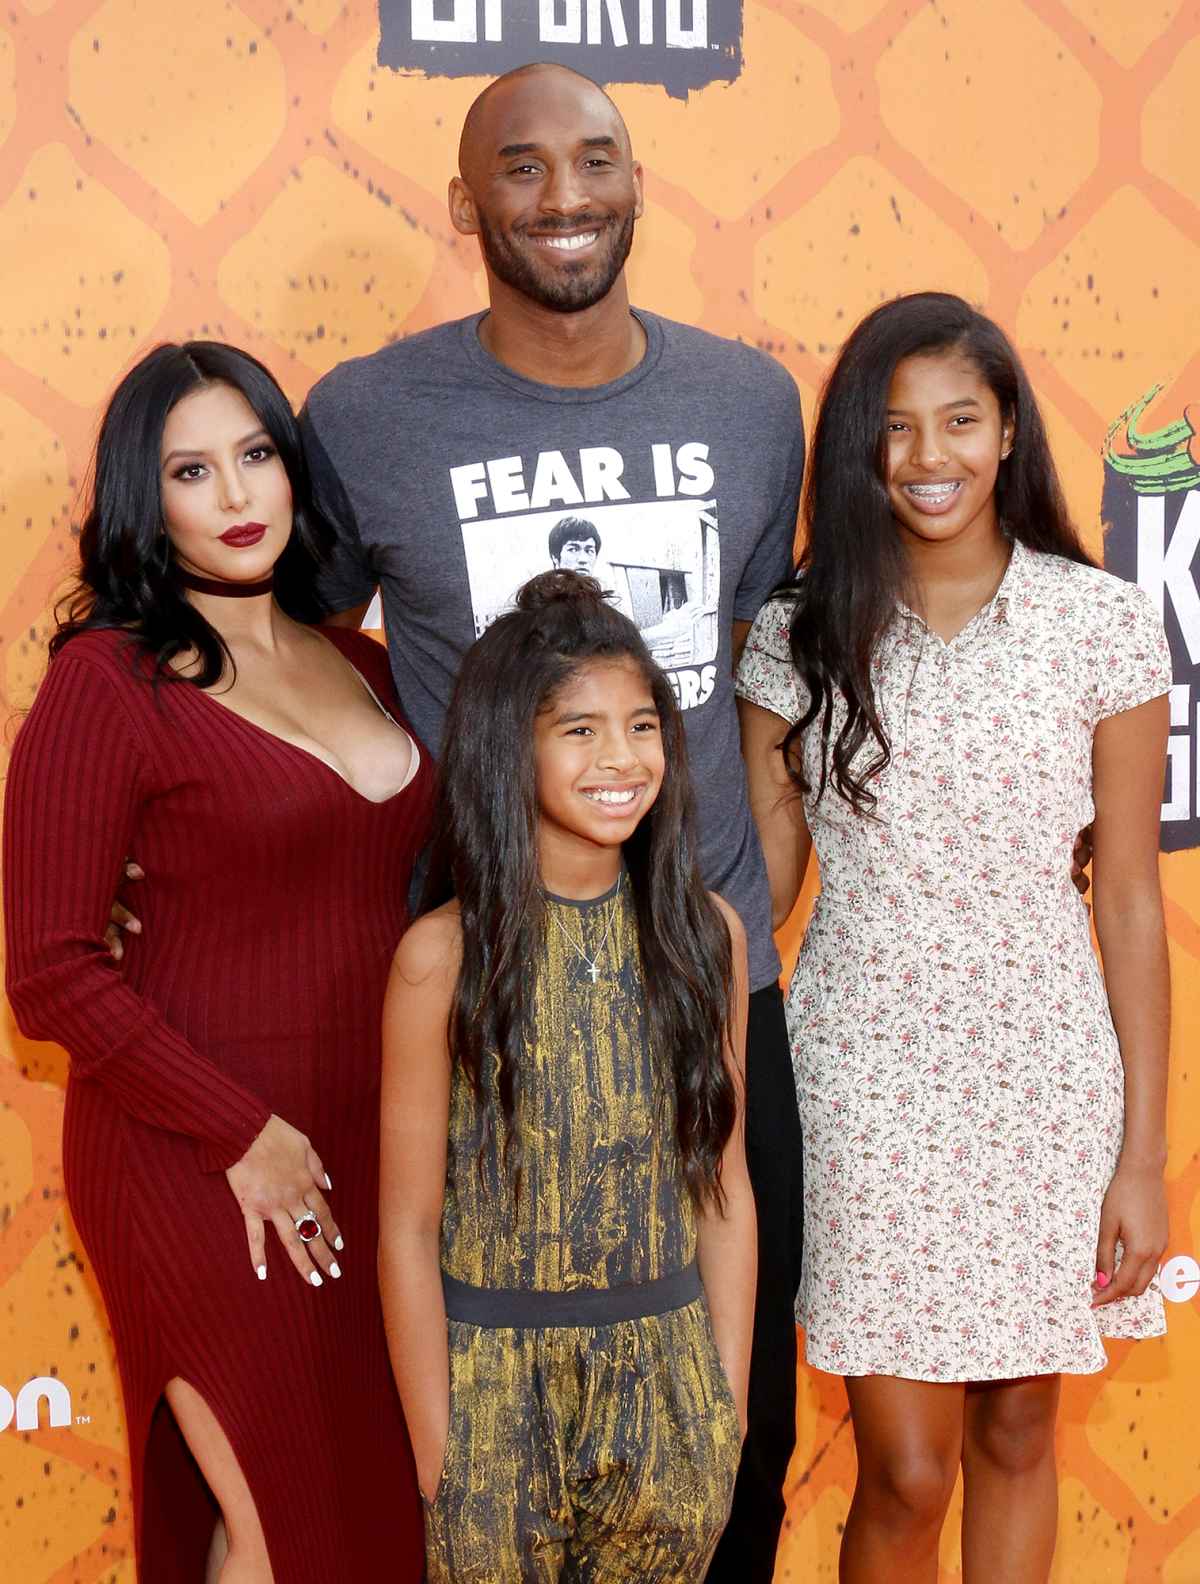 Kobe Bryant's bond with daughter Gianna was special